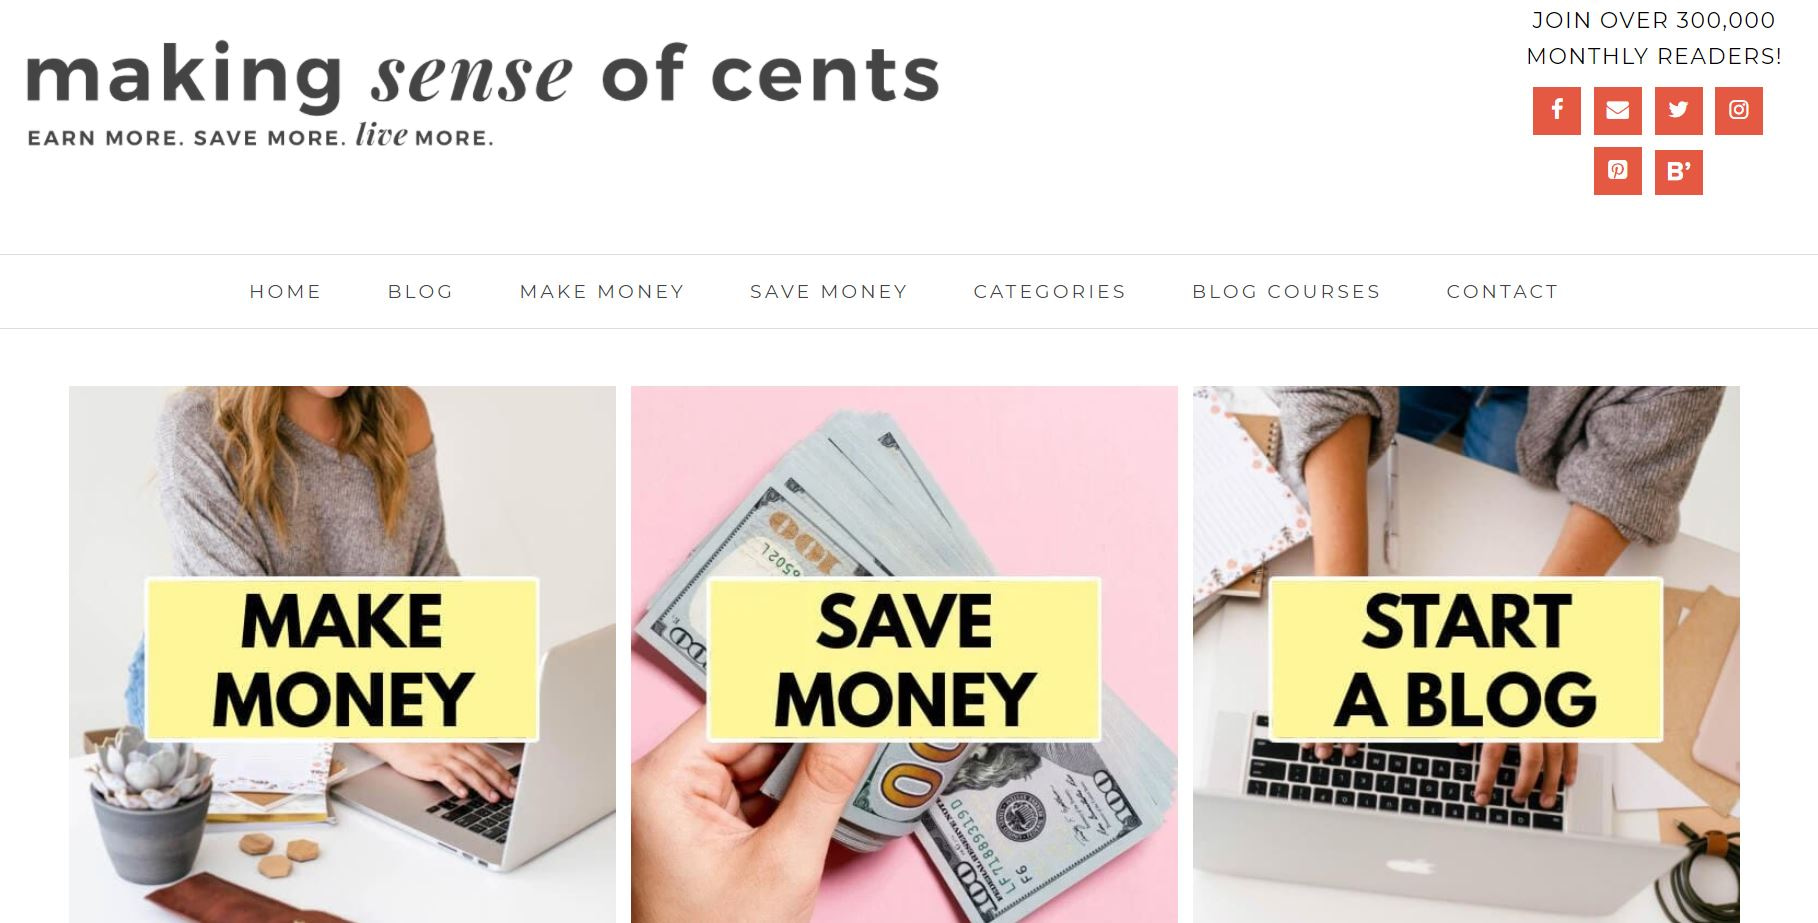 Making Sense of Cents is a blog on making money online, which is one of the most profitable blog niches worth exploring in 2022.